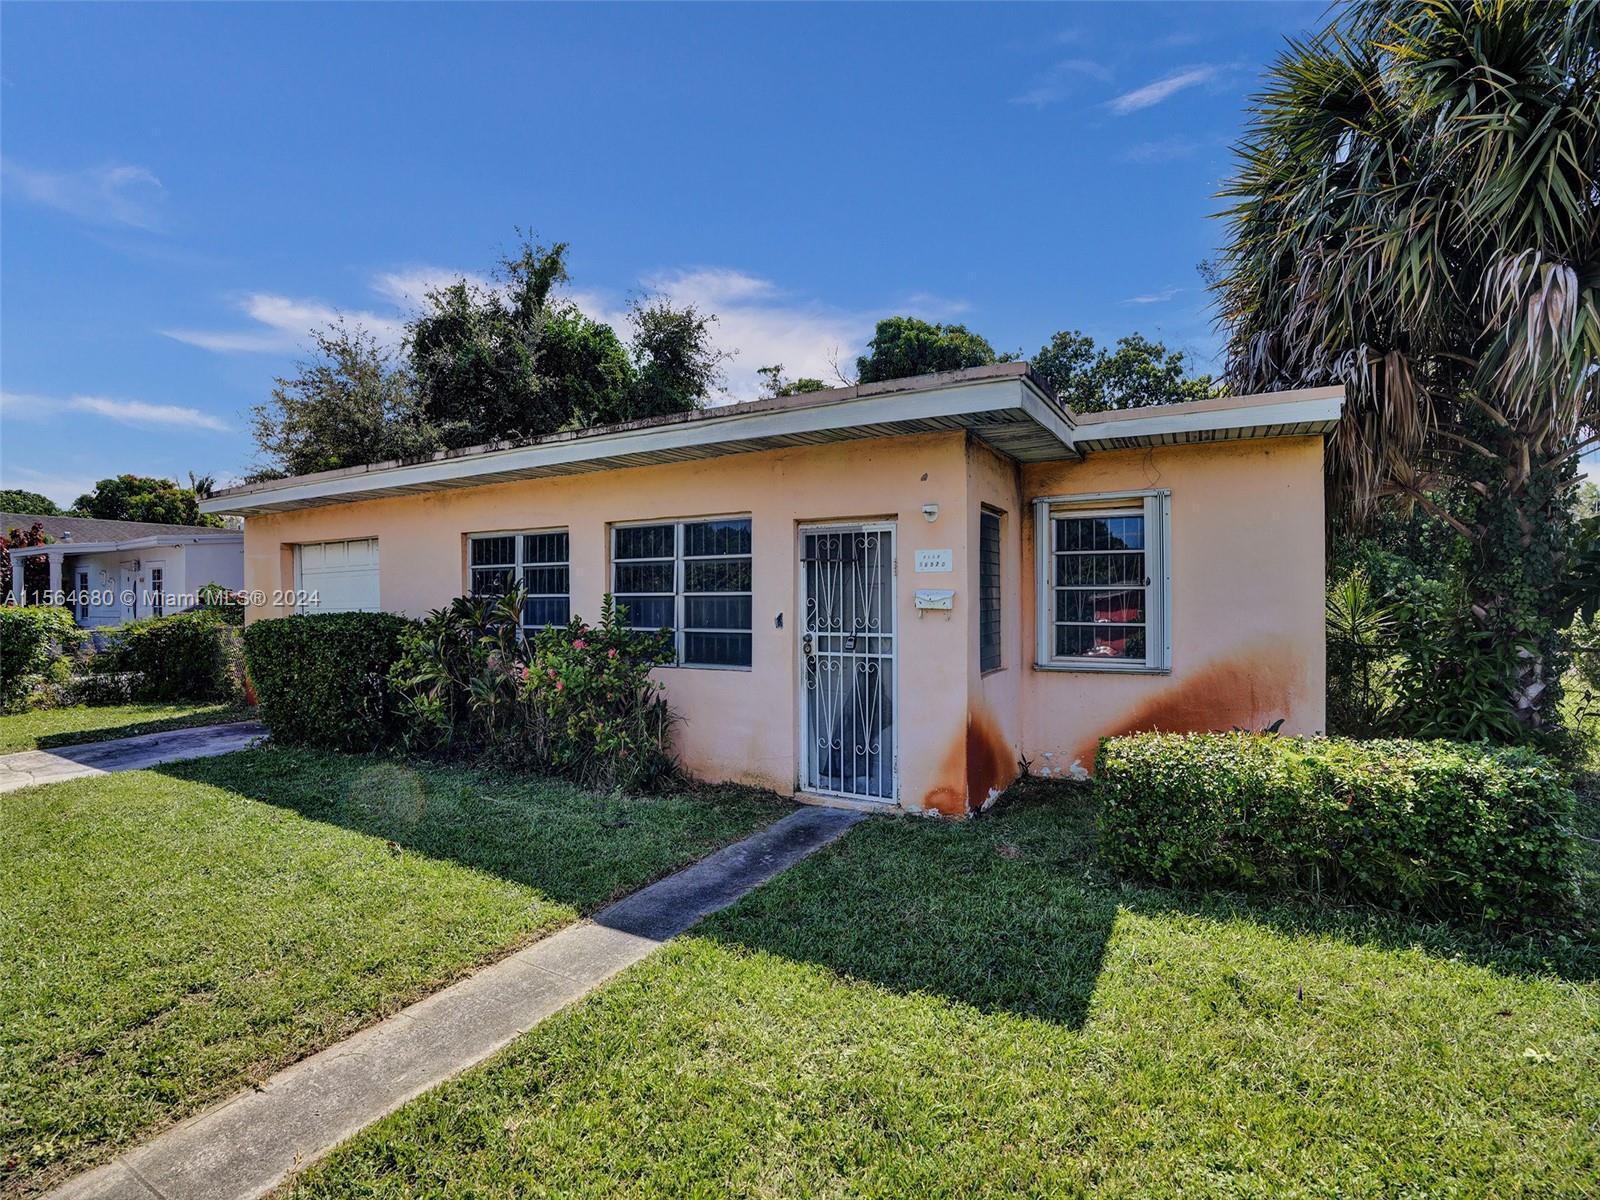 Photo of 16520 NW 22nd Ave in Miami Gardens, FL